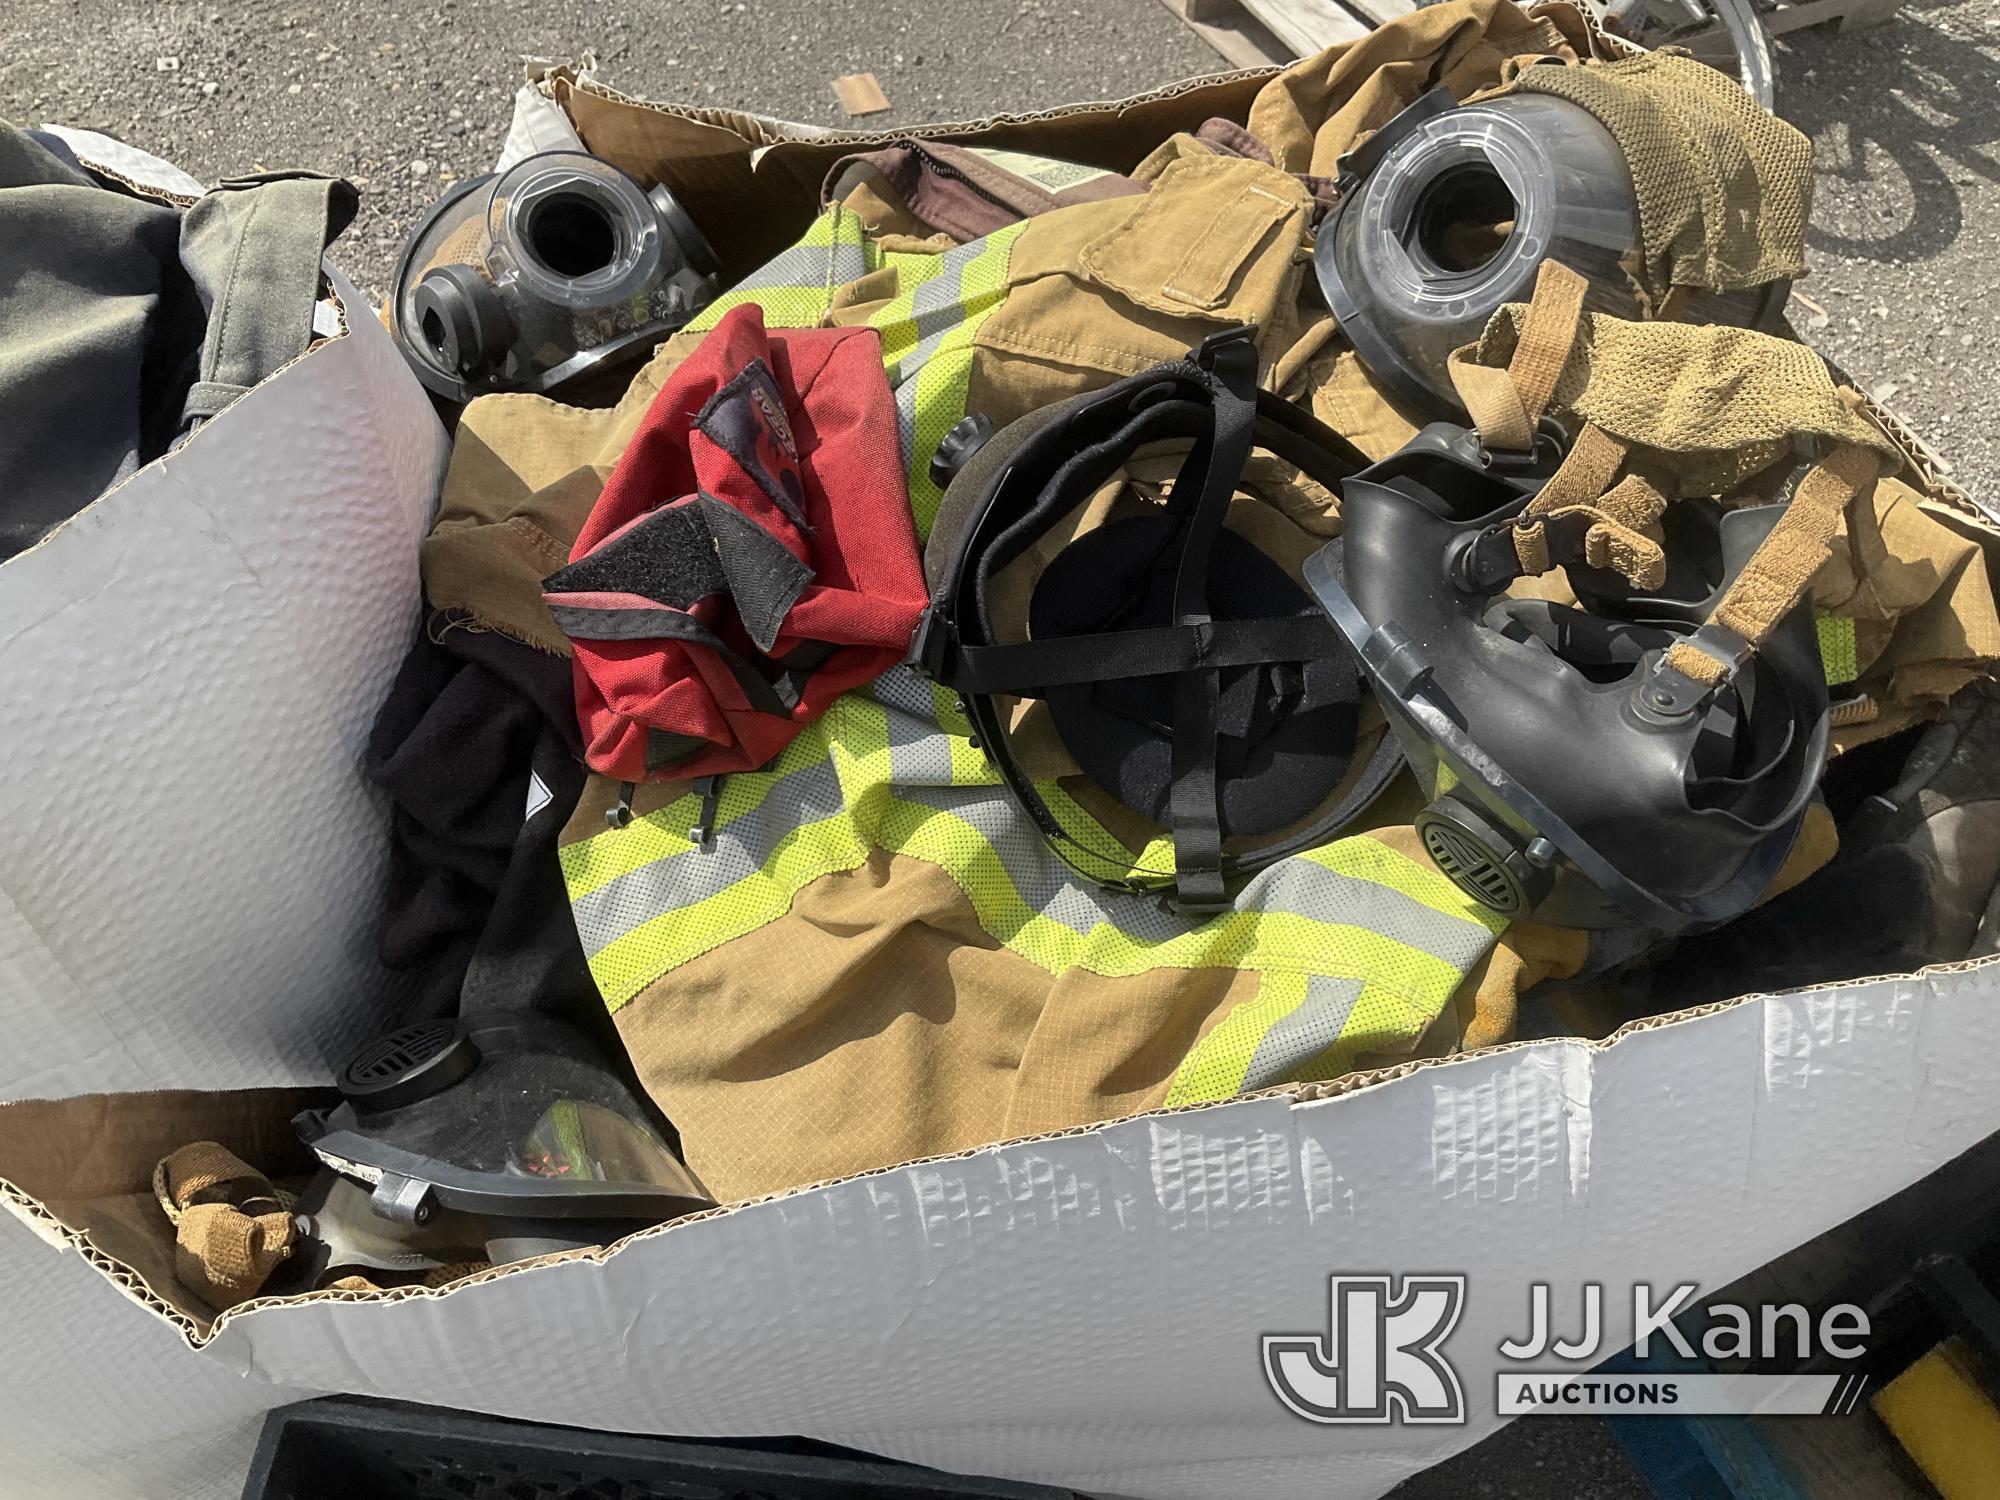 (Jurupa Valley, CA) 10 Pallets Of Fire Fighting Equipment Used